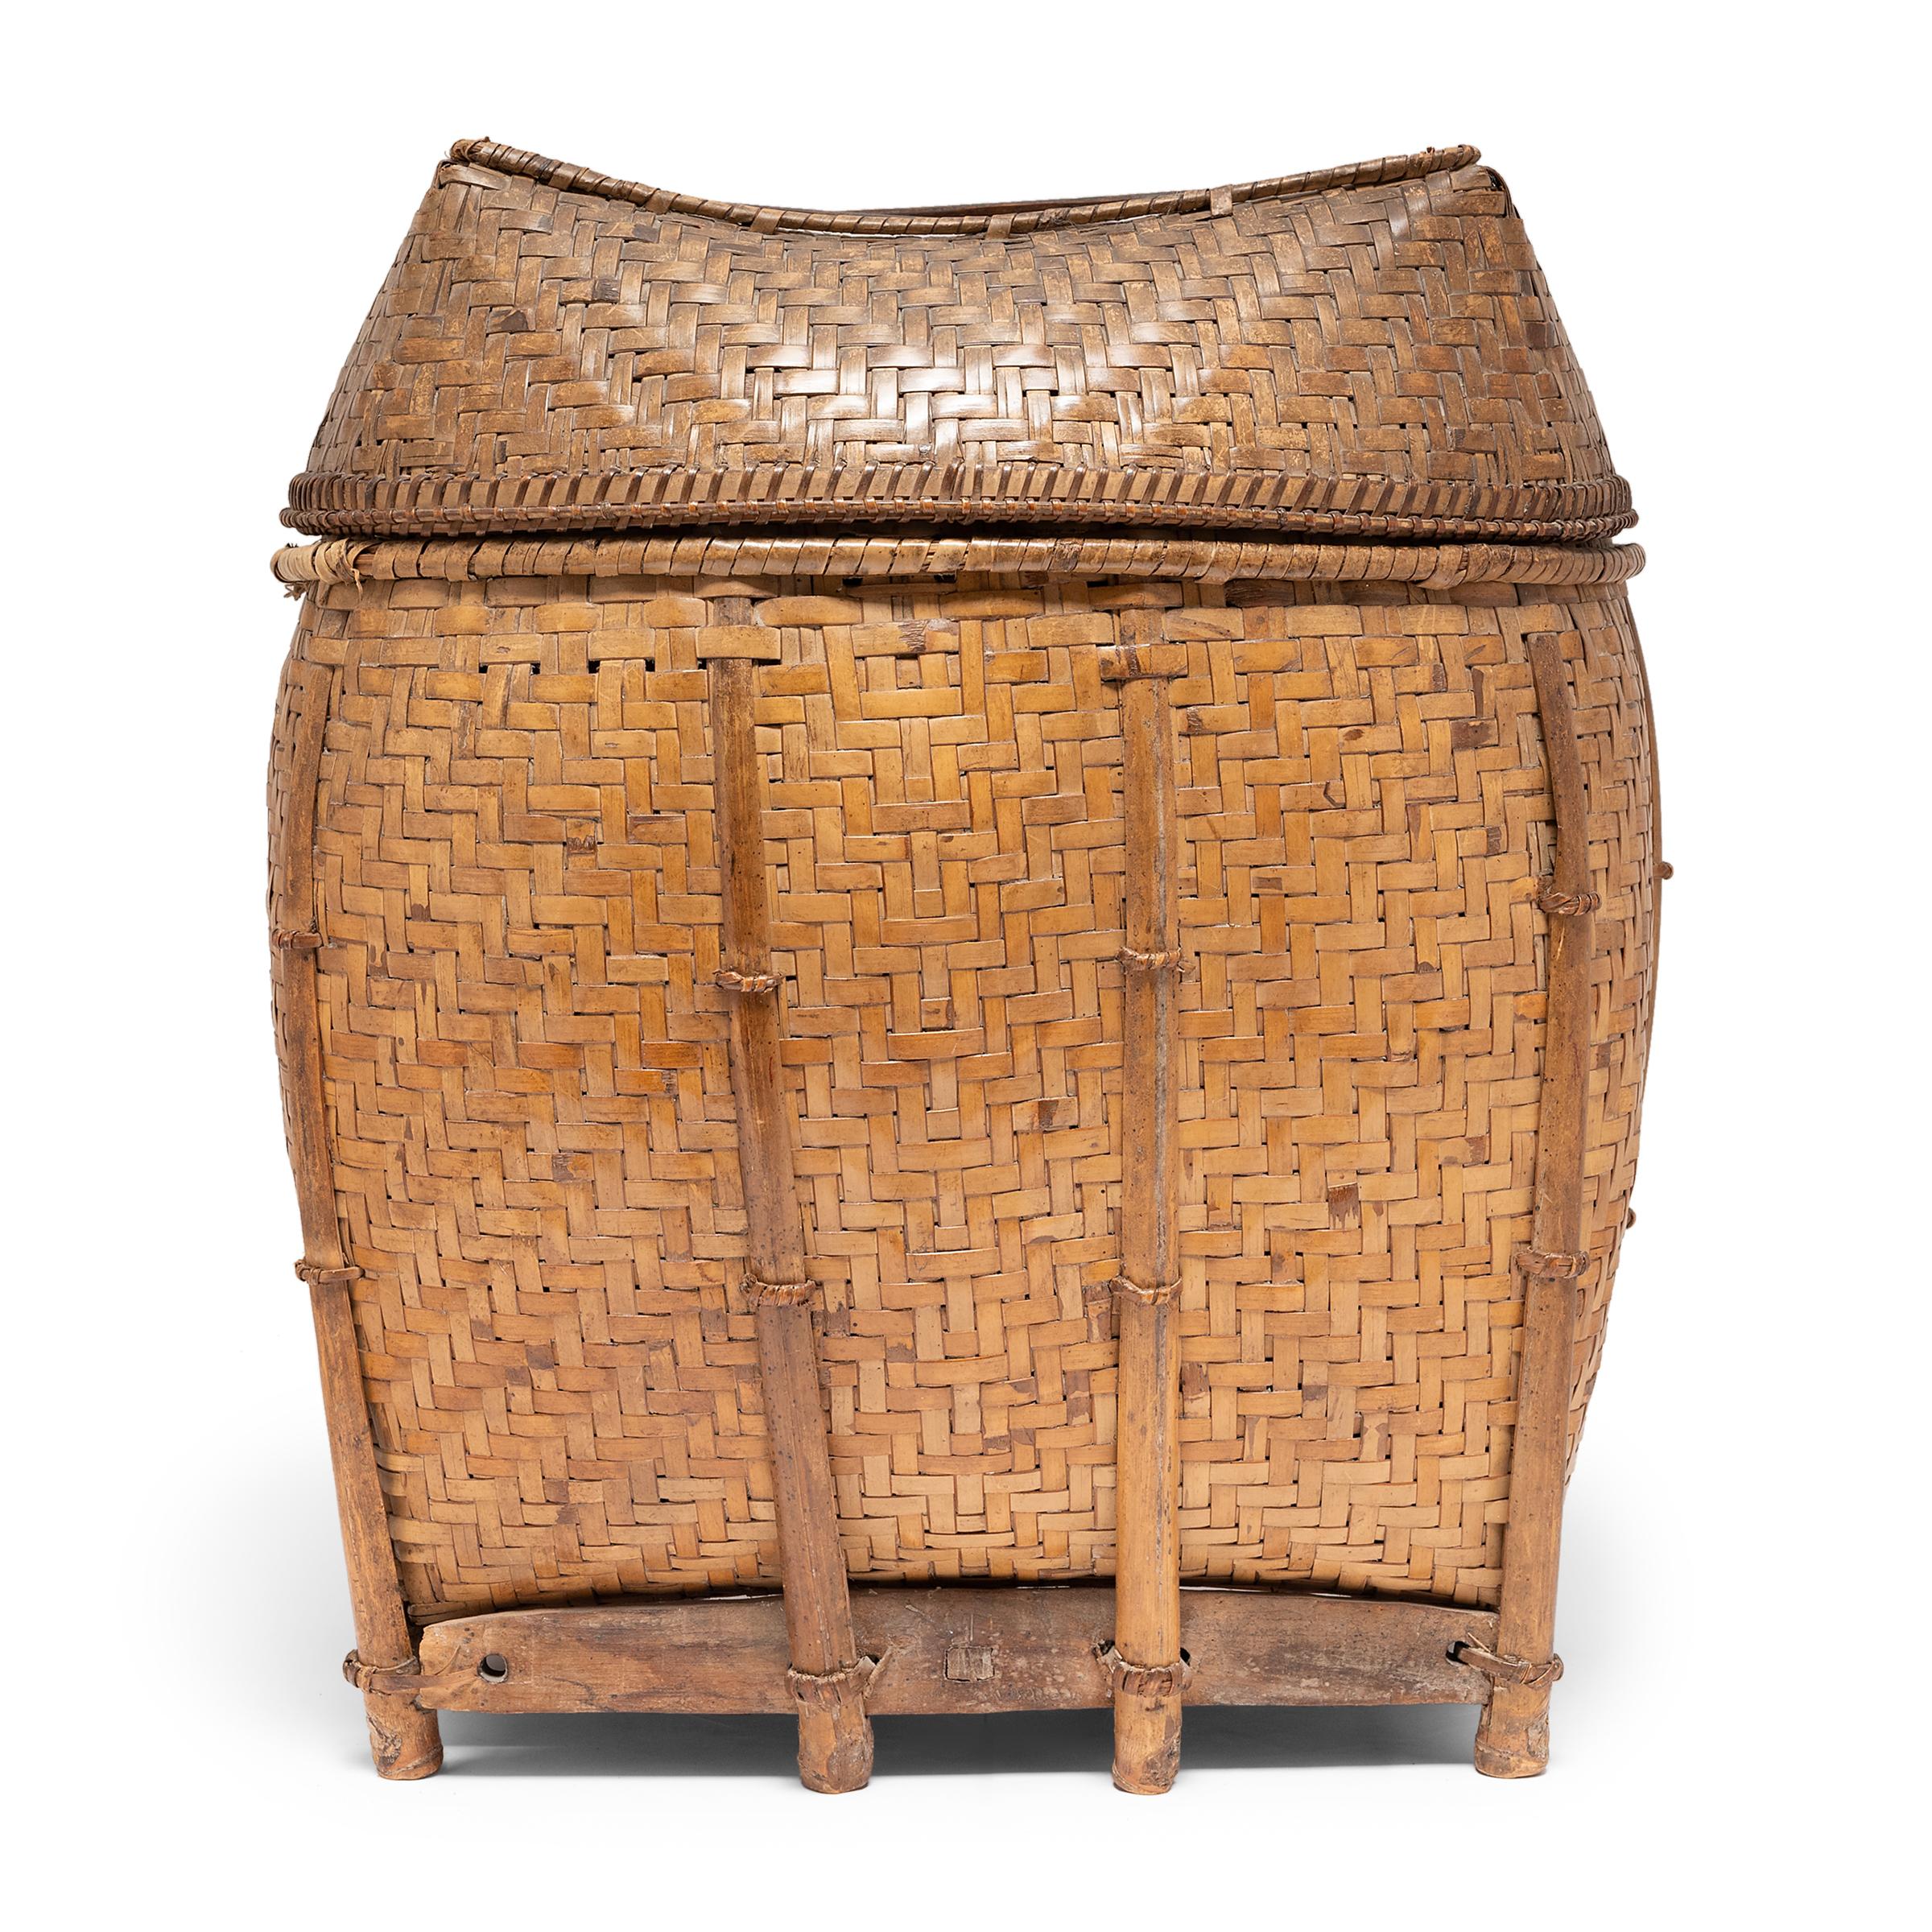 Basket making is an ancient and humble craft, but in the hands of a skilled weaver a simple reed basket can become a truly beautiful work of art. Hand-made in the Philippines, this lidded basket was once used for harvesting crops or carrying